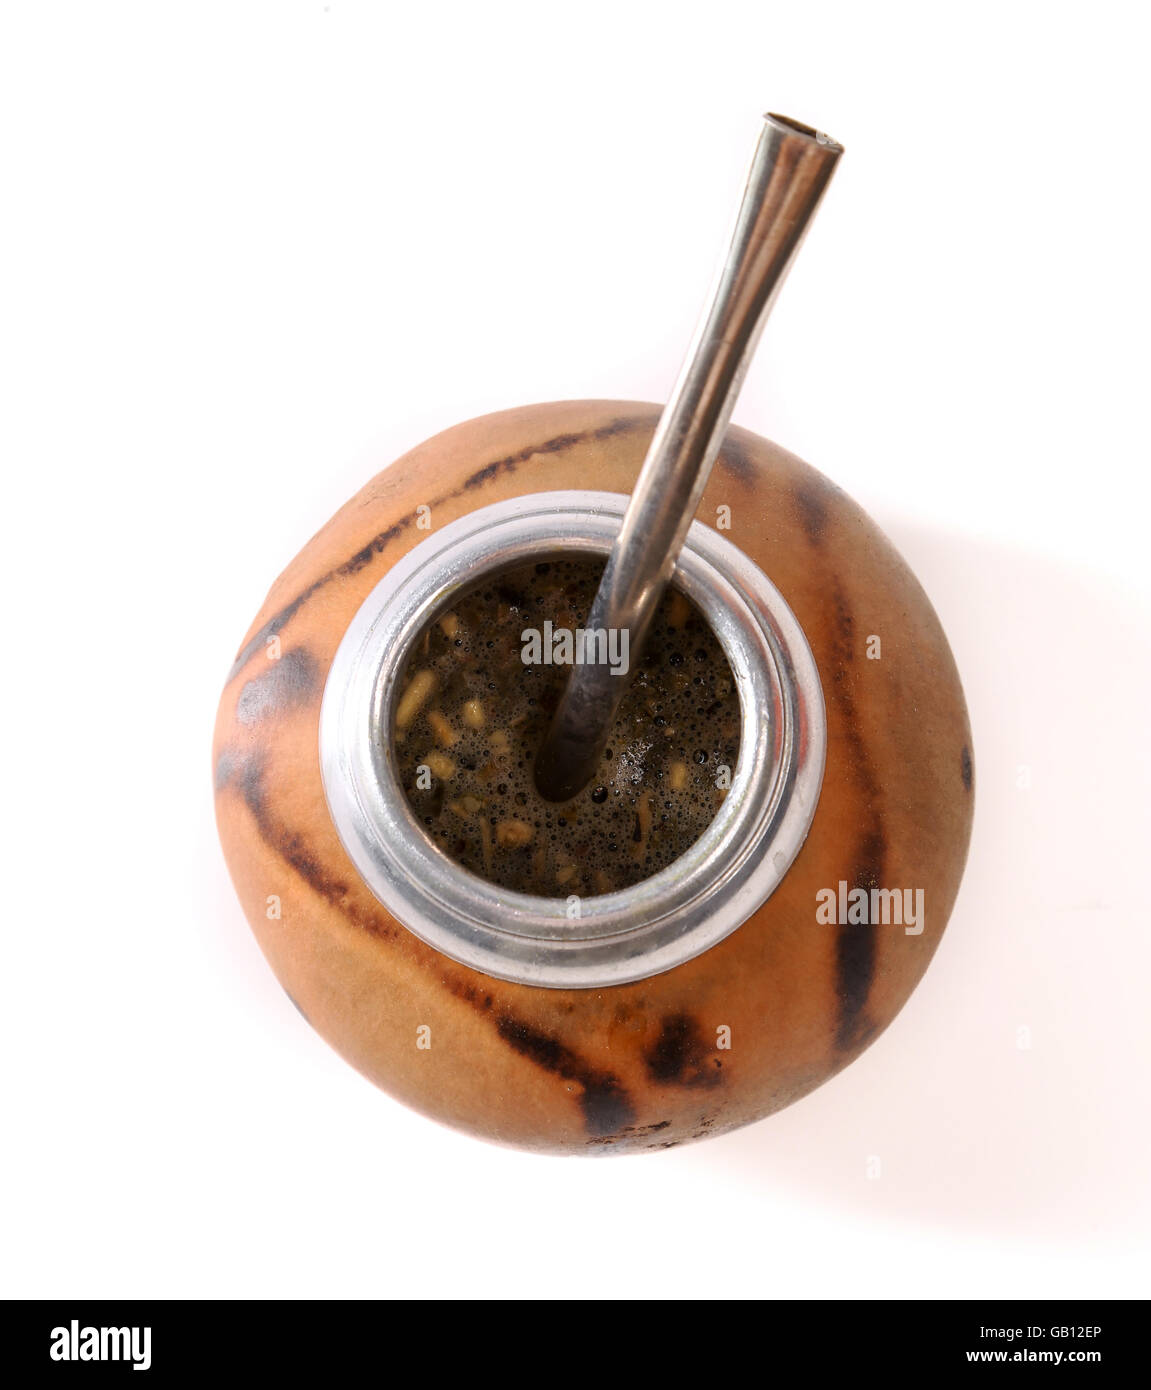 Yerba mate tea pot Cut Out Stock Images & Pictures - Alamy